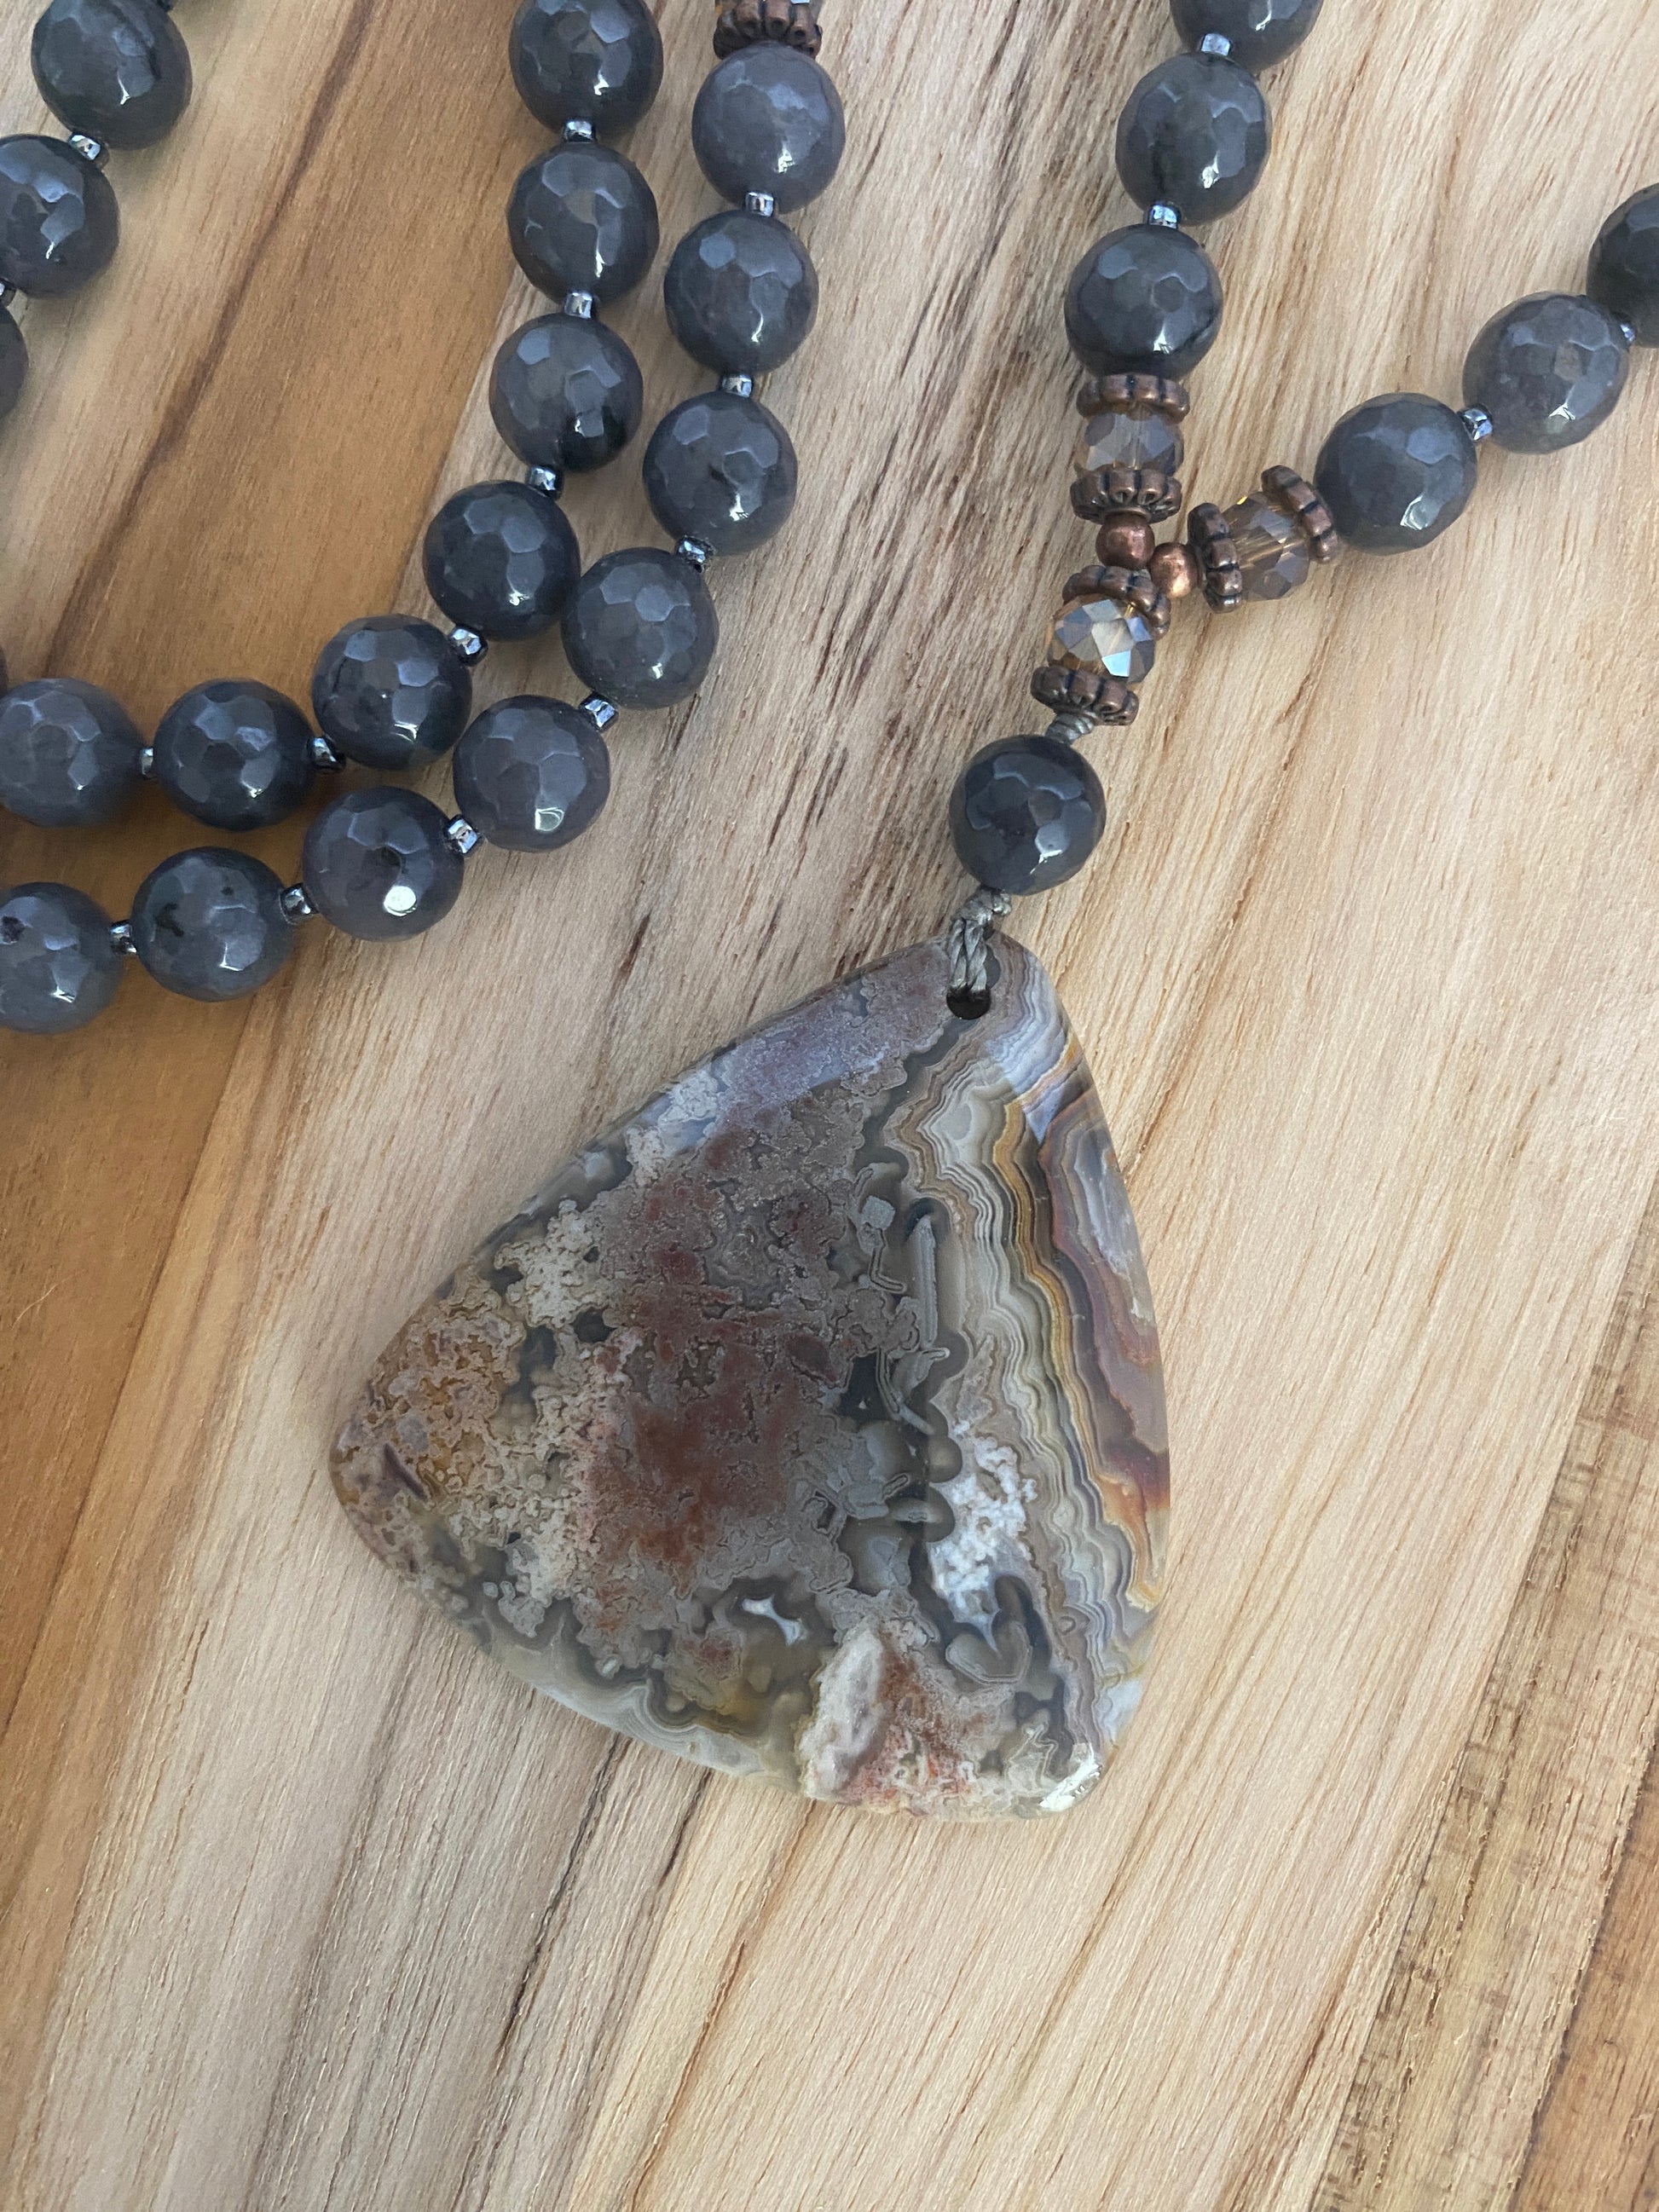 30" Long Crazy Lace Triangle Agate Pendant Necklace with Dark Grey Agate, Crystal & Copper Beads - My Urban Gems